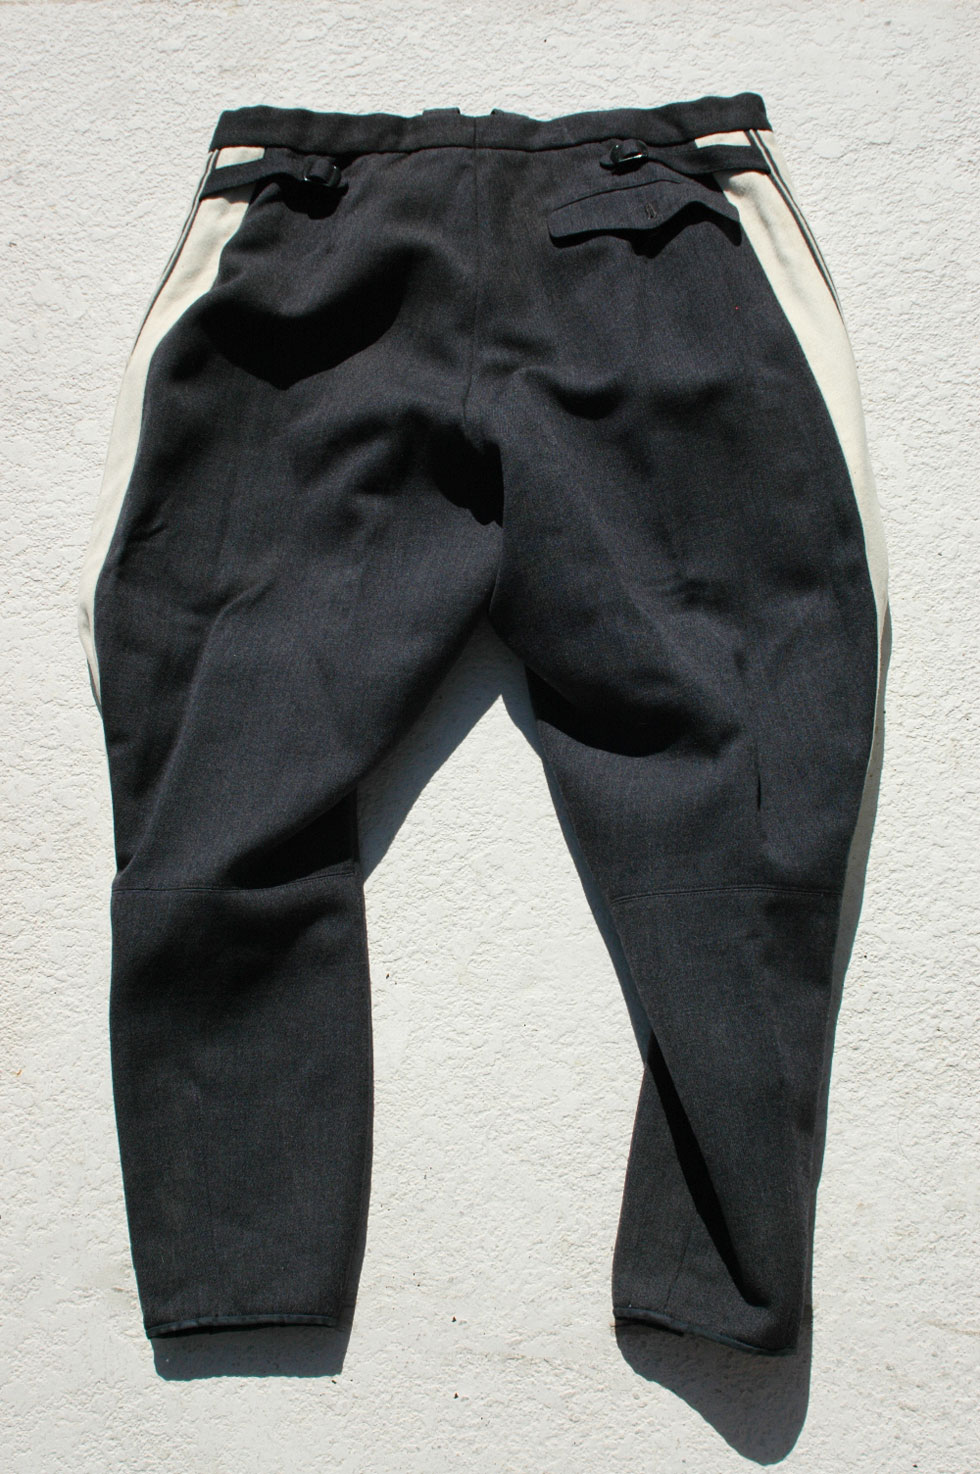 Luftwaffe General's Trousers